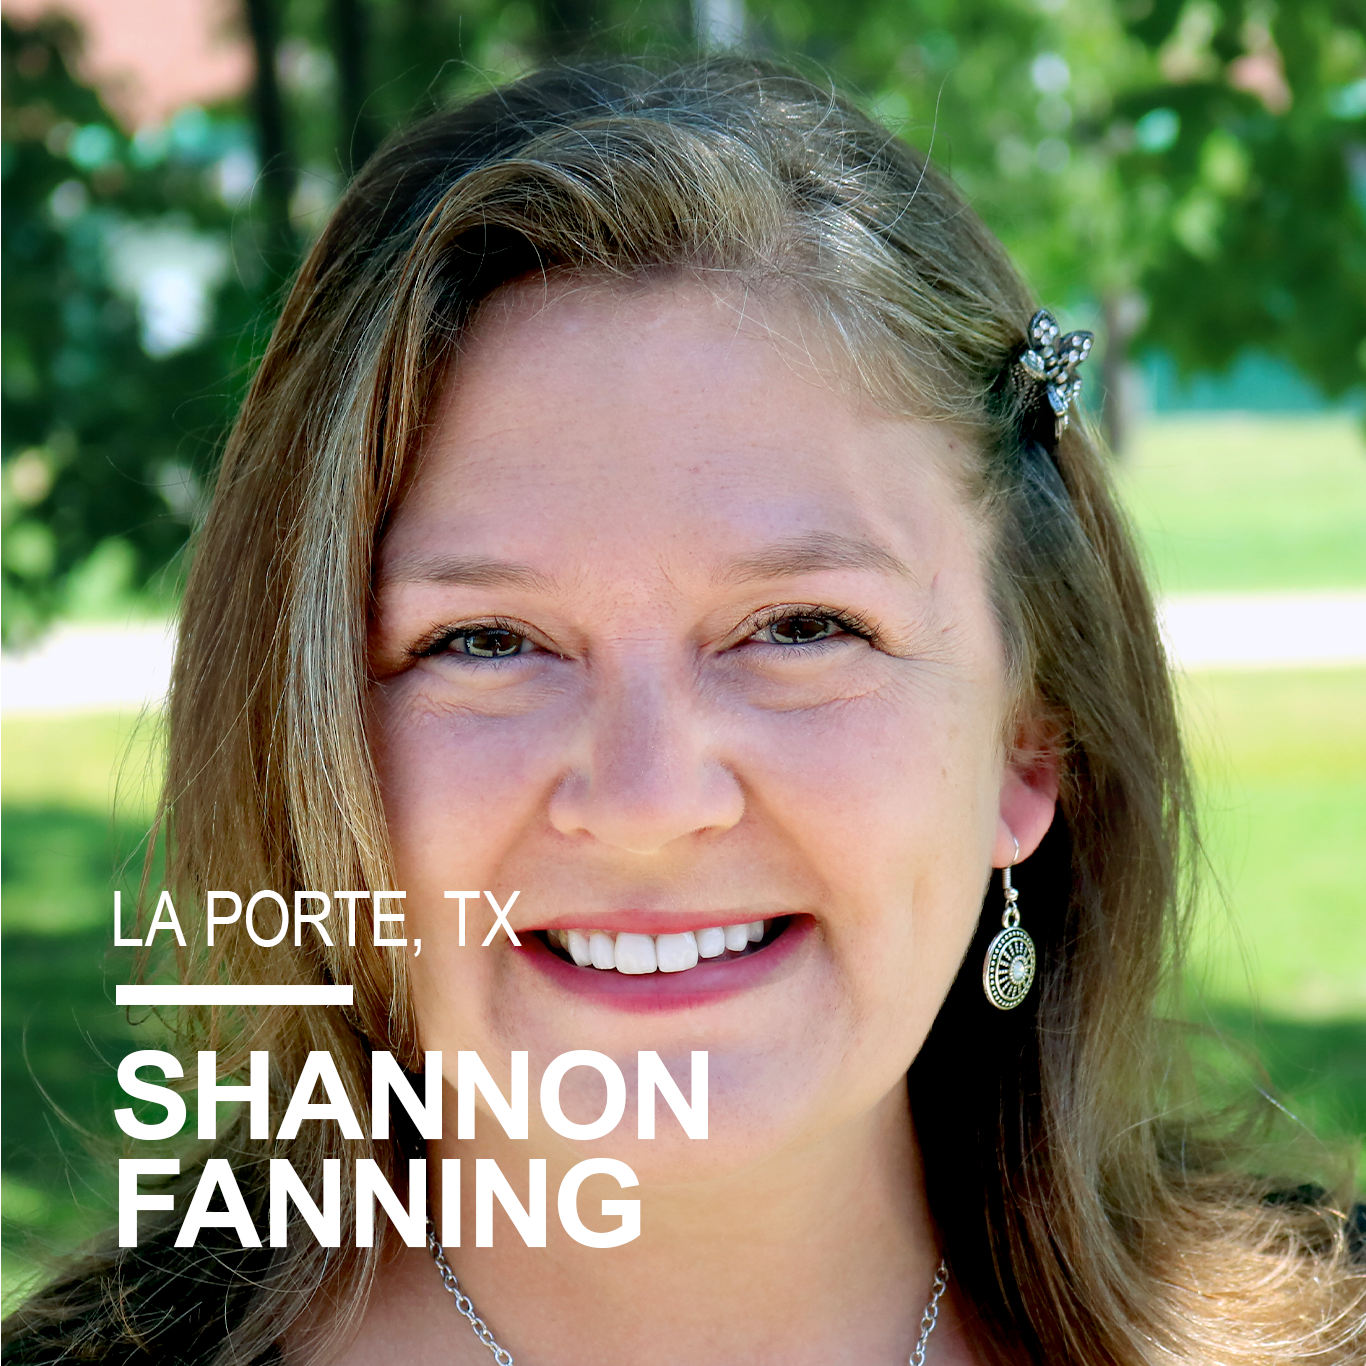 Shannon Fanning is the elementary STEM coordinator and robotics coordinator for La Porte ISD in La Porte, TX. She has a bachelor’s in Elementary Education and a master’s in Teaching Leadership and is EC-8, ESL, and GT certified. She was the La Porte Elementary Teacher of the Year in 2021, and received the Elementary Shell Science Lab Regional Challenge award in 2022. Shannon is passionate about robotics, coding, and all things STEM and STEAM and loves finding amazing opportunities for her students to experience these subjects.